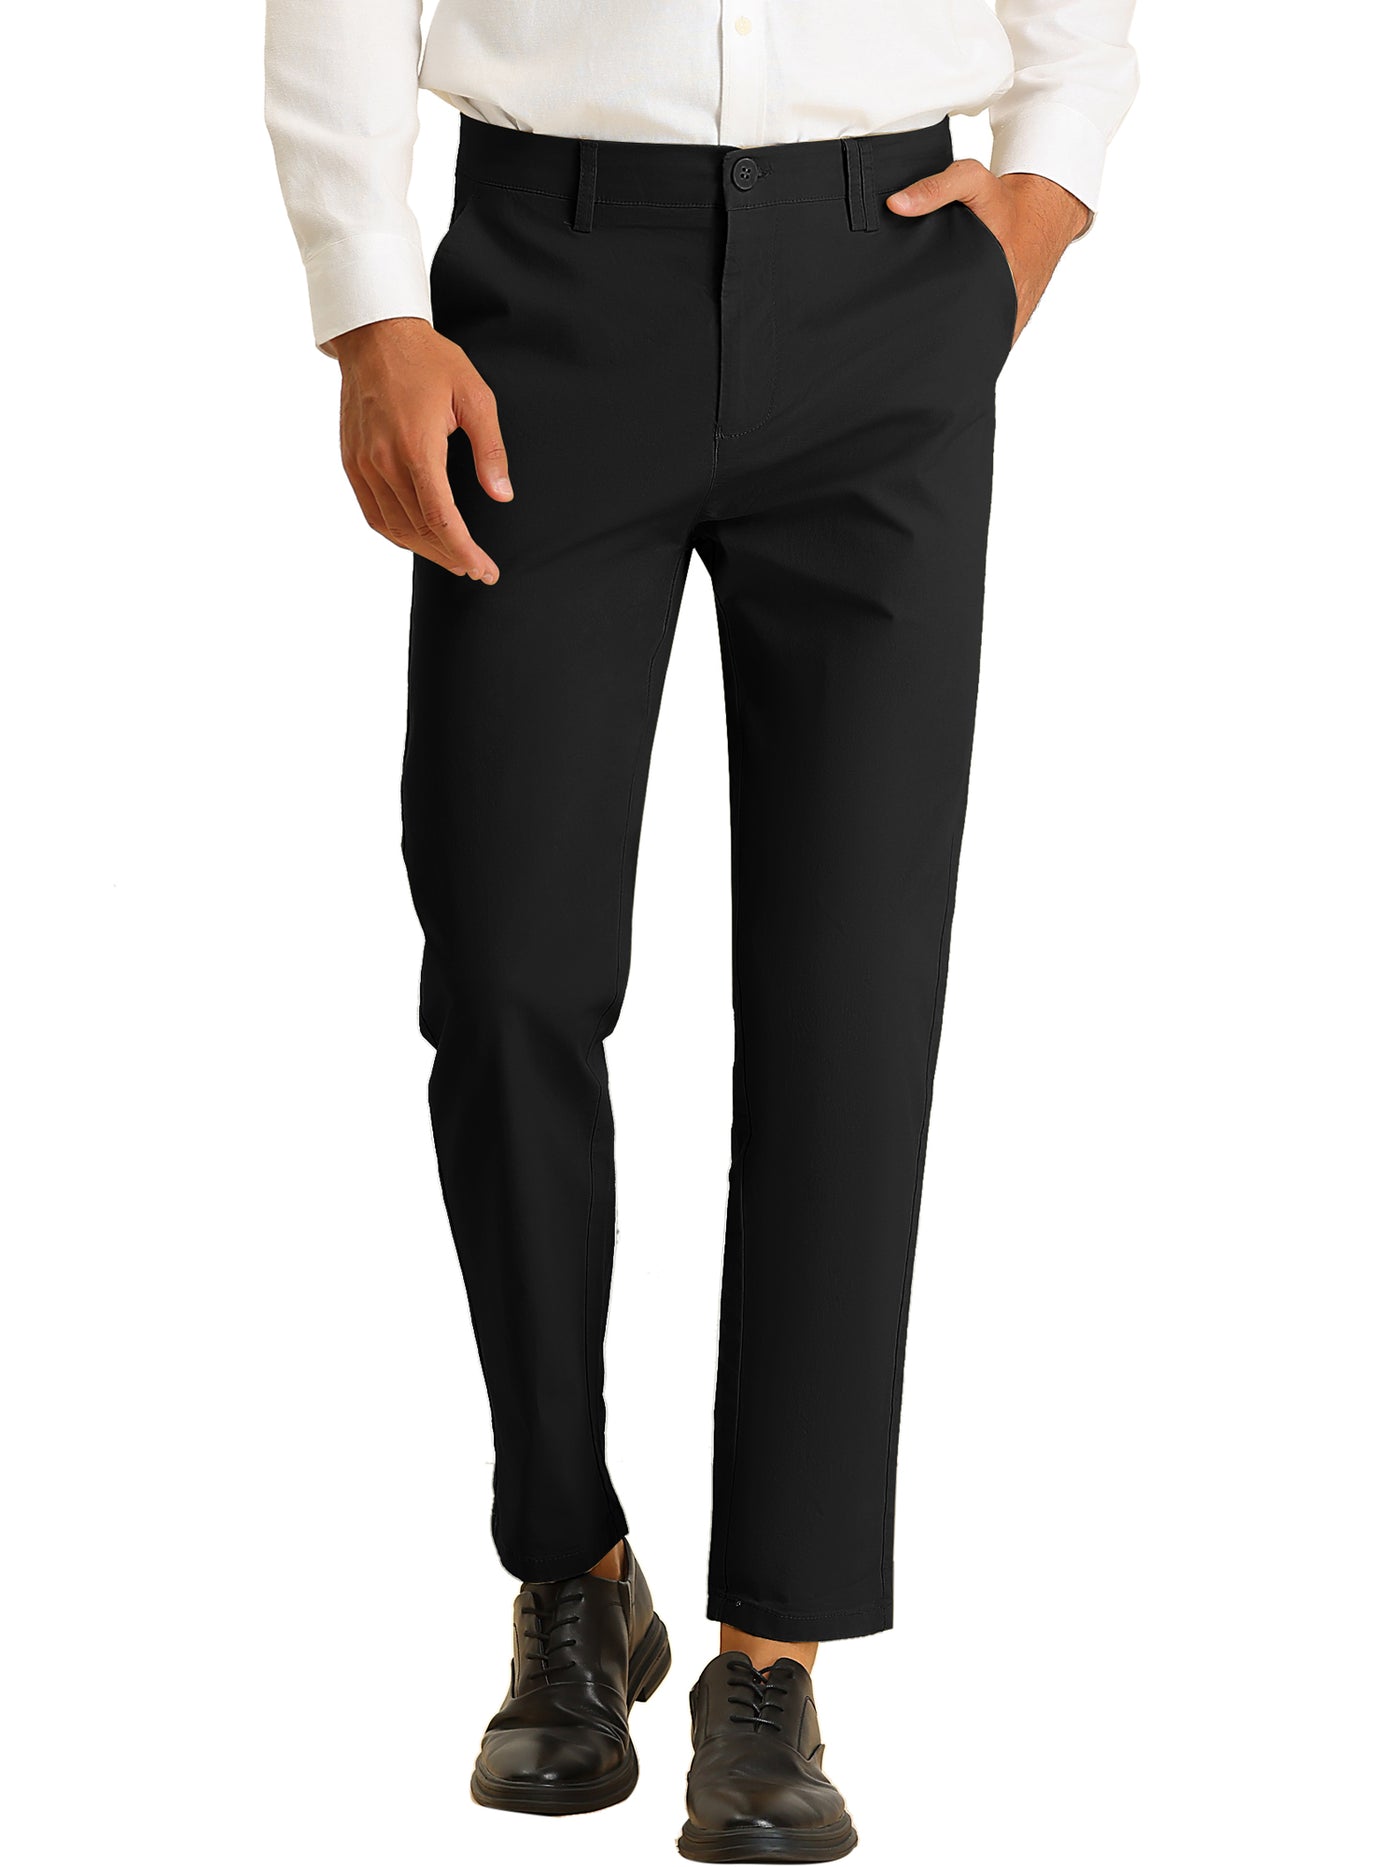 Bublédon Men's Cropped Dress Pants Flat Front Prom Tapered Trousers